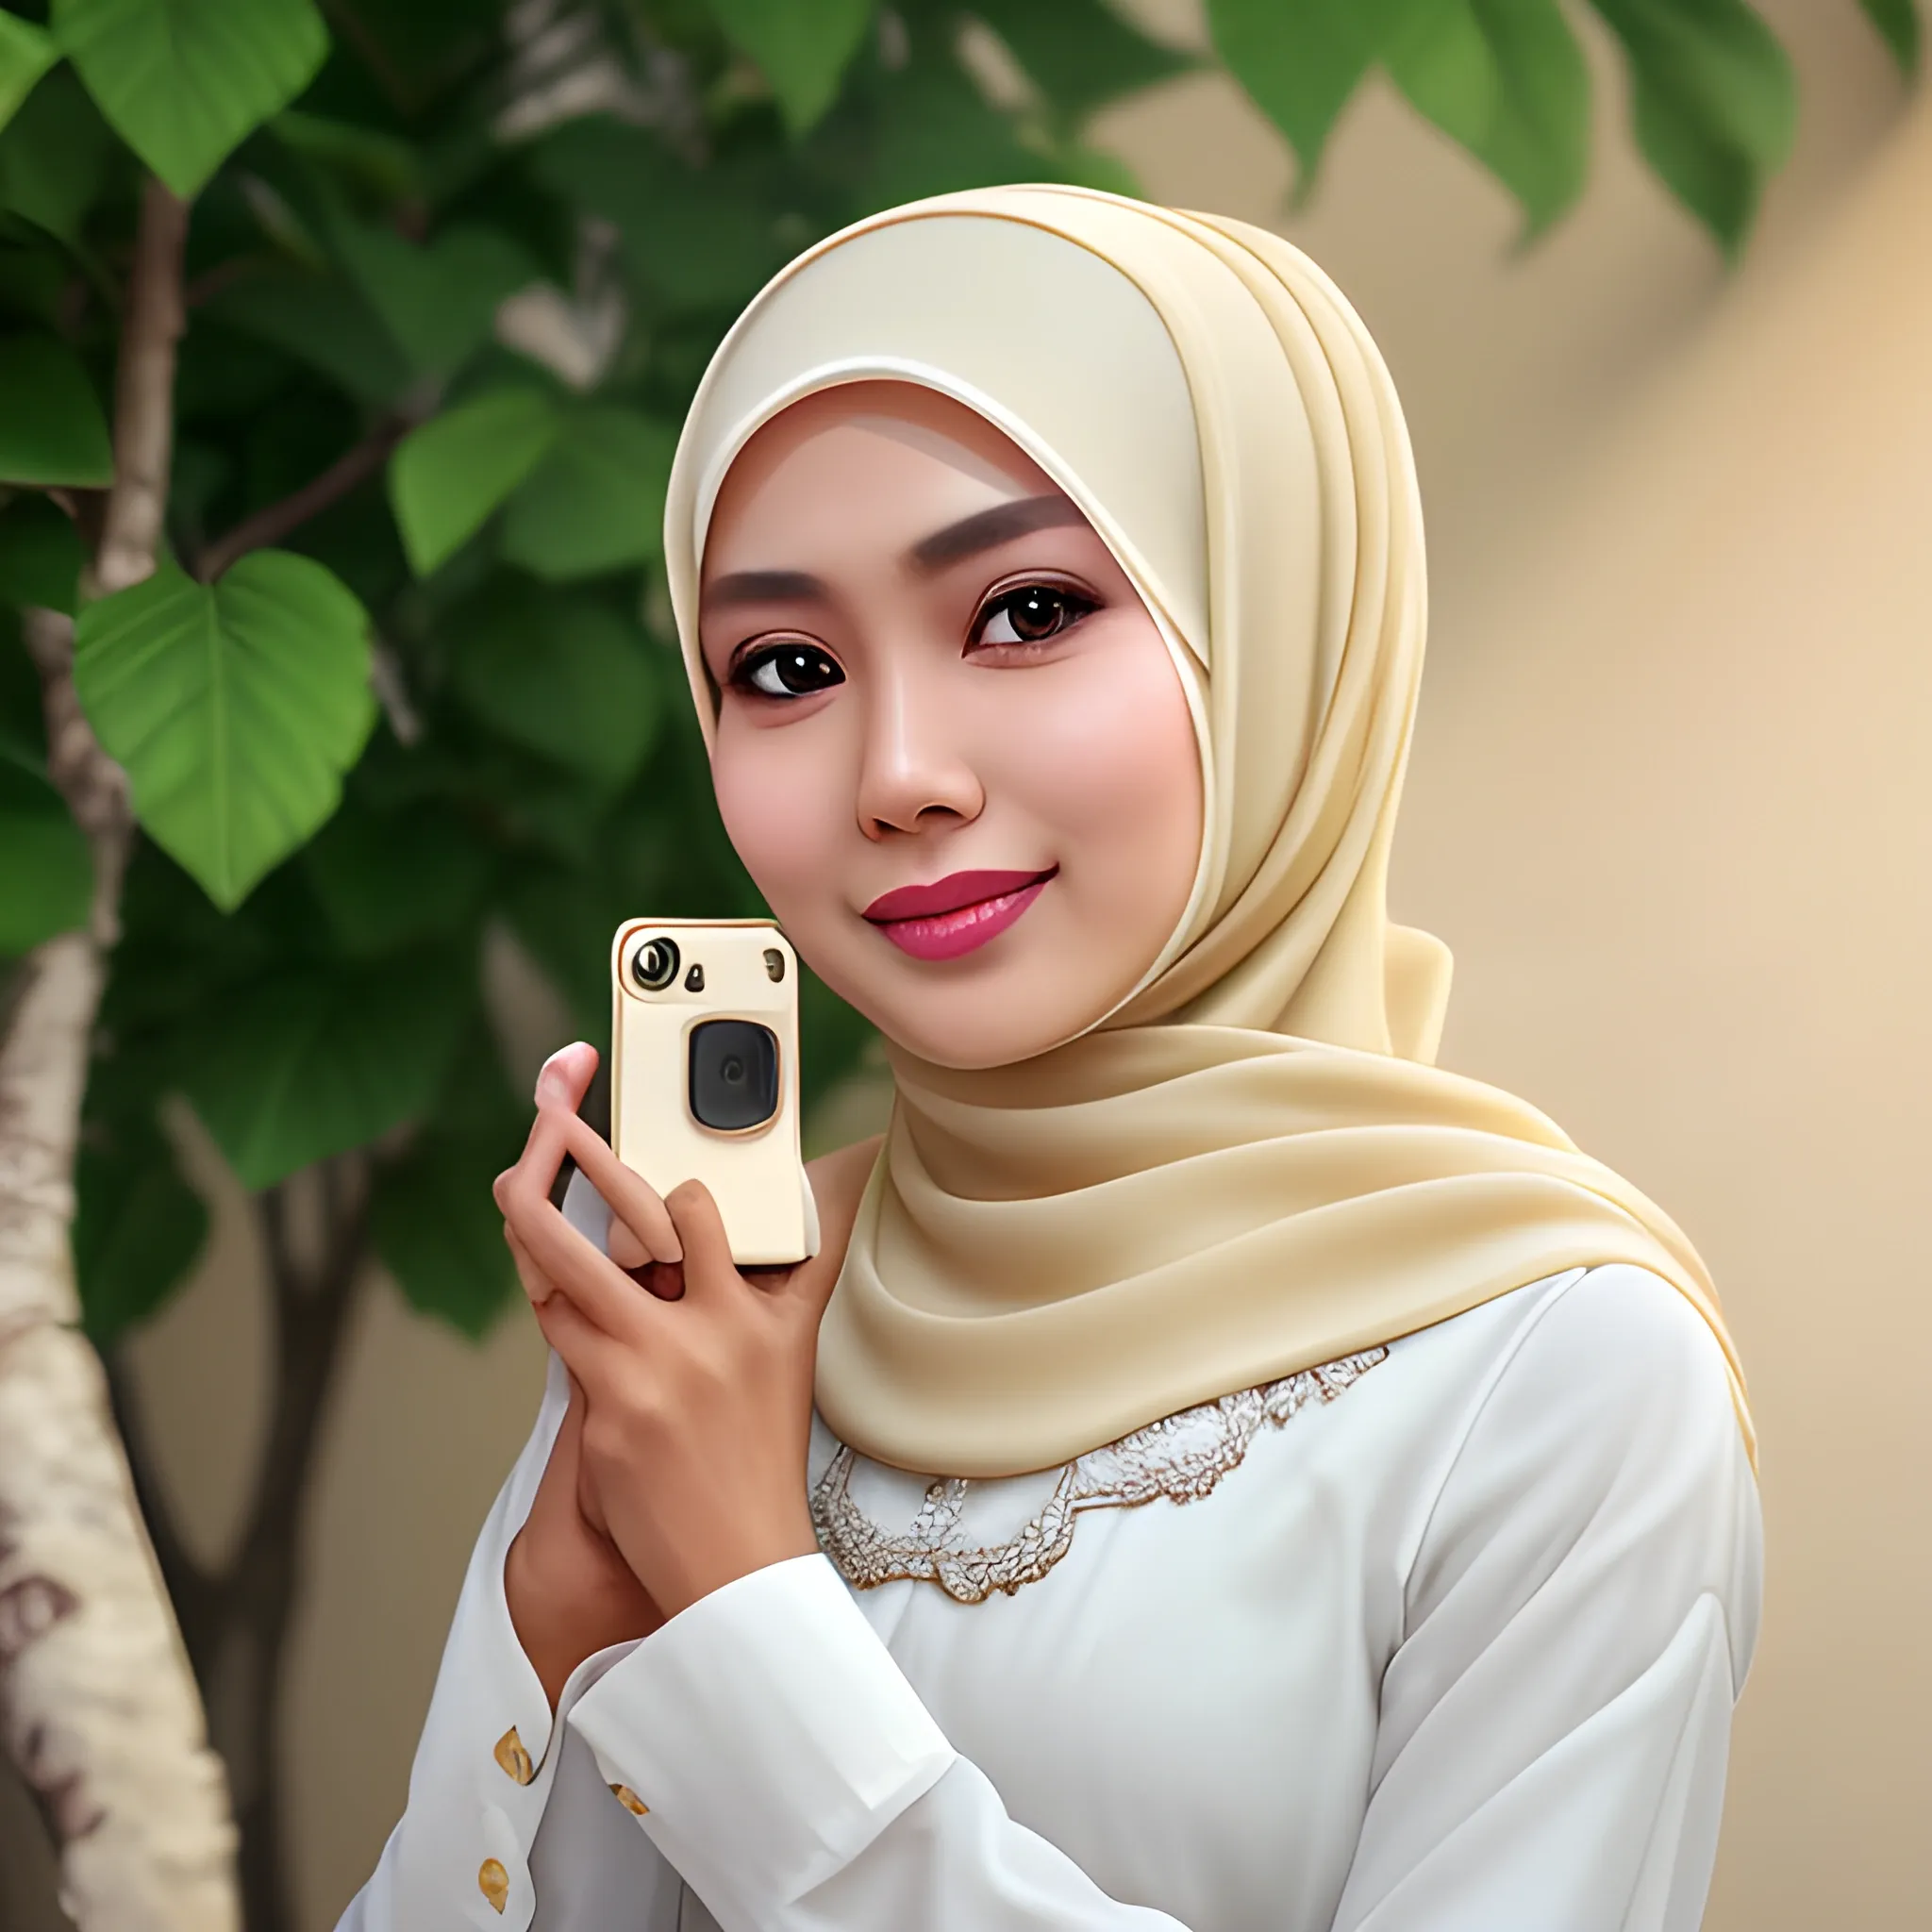 pretty women indonesian, elegant, happy, face detail, sharp nose, black eyes, wearing cream hijab, cream blouse casual, beside the jasmines, her hand was holding camera, her head Turned at camera, 4k